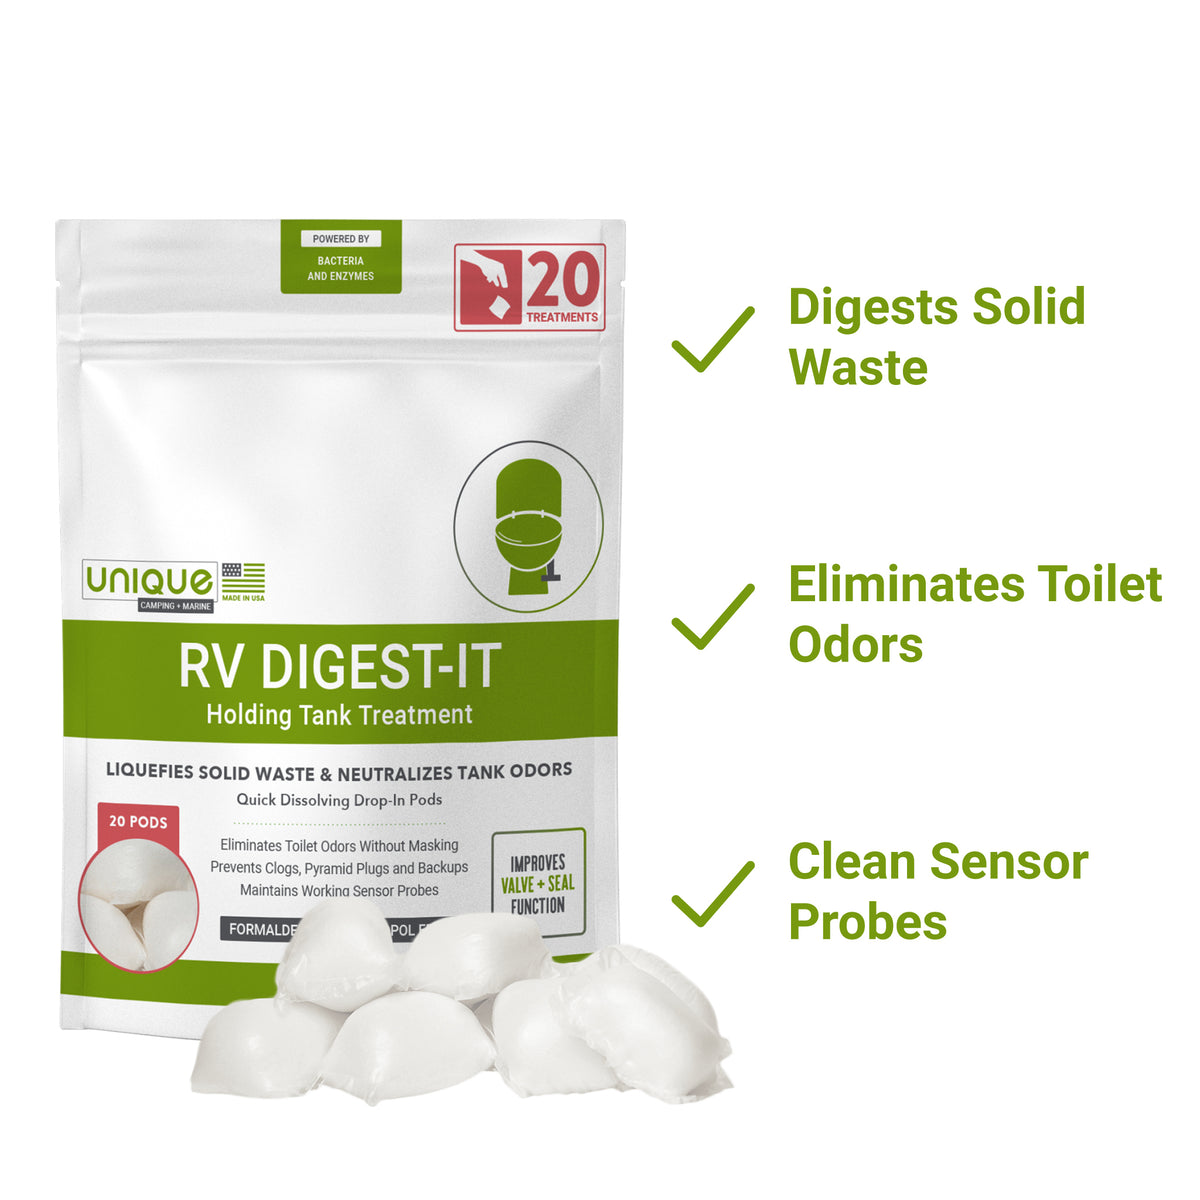 RV Digest-It 20 Drop-In Pods Formulated with Trust- the best RV holding tank treatment. Breakdown solid waste and reduce odors for dry campers. Prevent clogs and odors in your RV, Fifth Wheel, Camper, Motorhome, or Coach